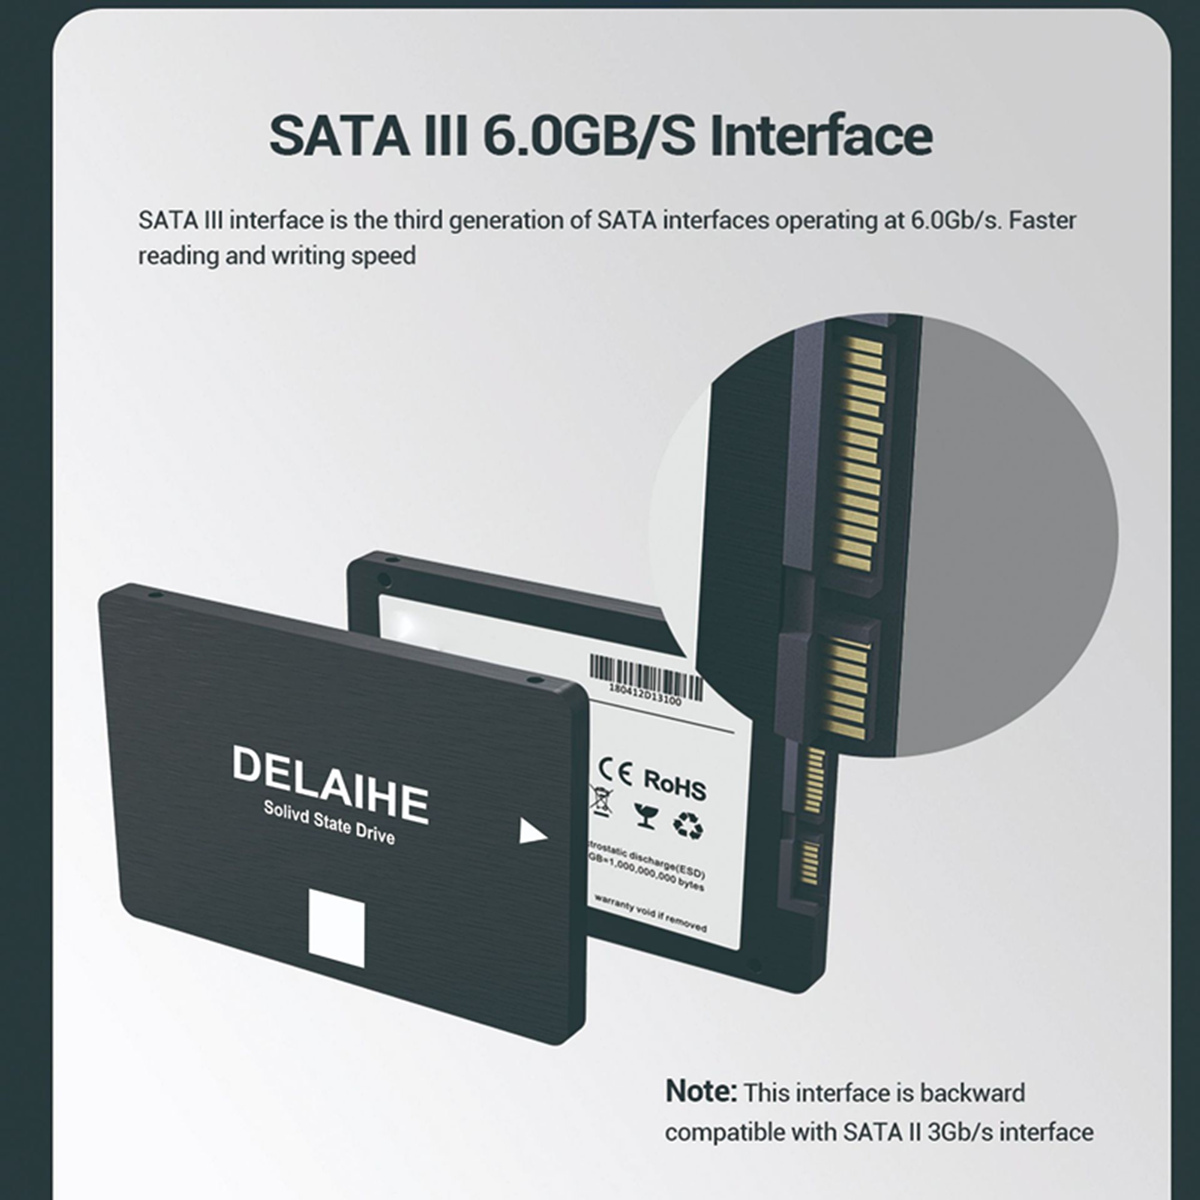 2.5 inch SATA3 High Speed Solid State Drive SSD 500GB 1TB 2TB Hard Drive for Notebook Desktop